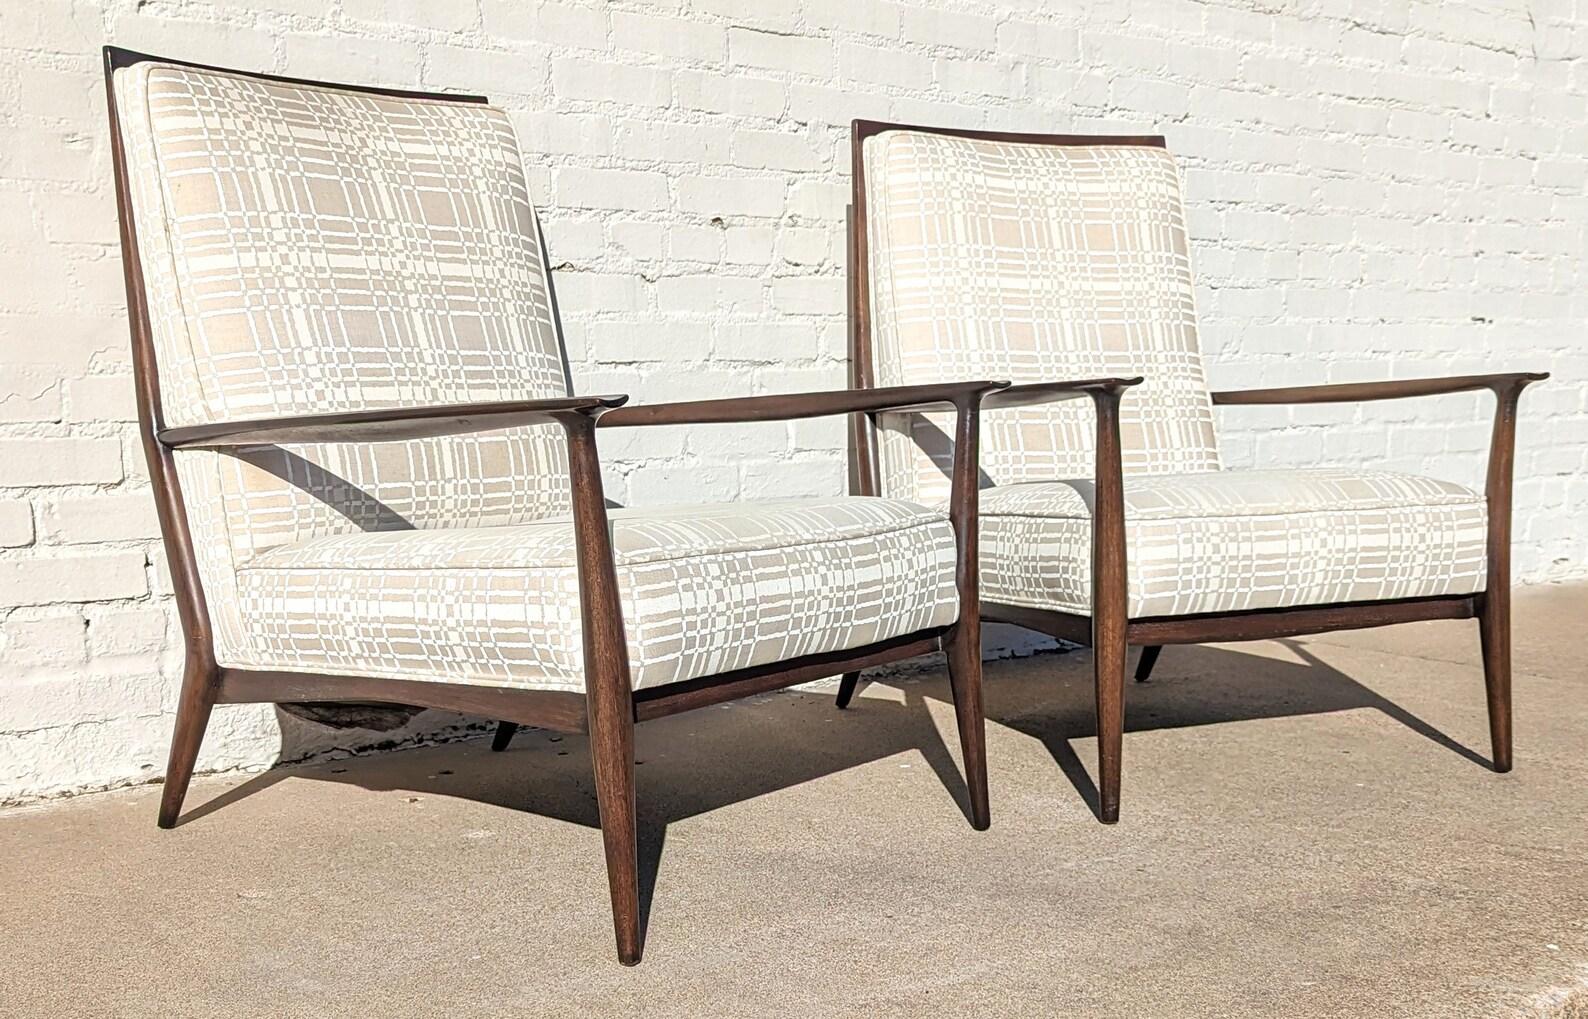 Pair of Mid Century Modern Paul McCobb for Directional Lounge Chairs

Above average vintage condition and structurally sound. Has some expected slight finish wear and scratching.  Upholstery has no tears or cuts but has some soiling and wear on both